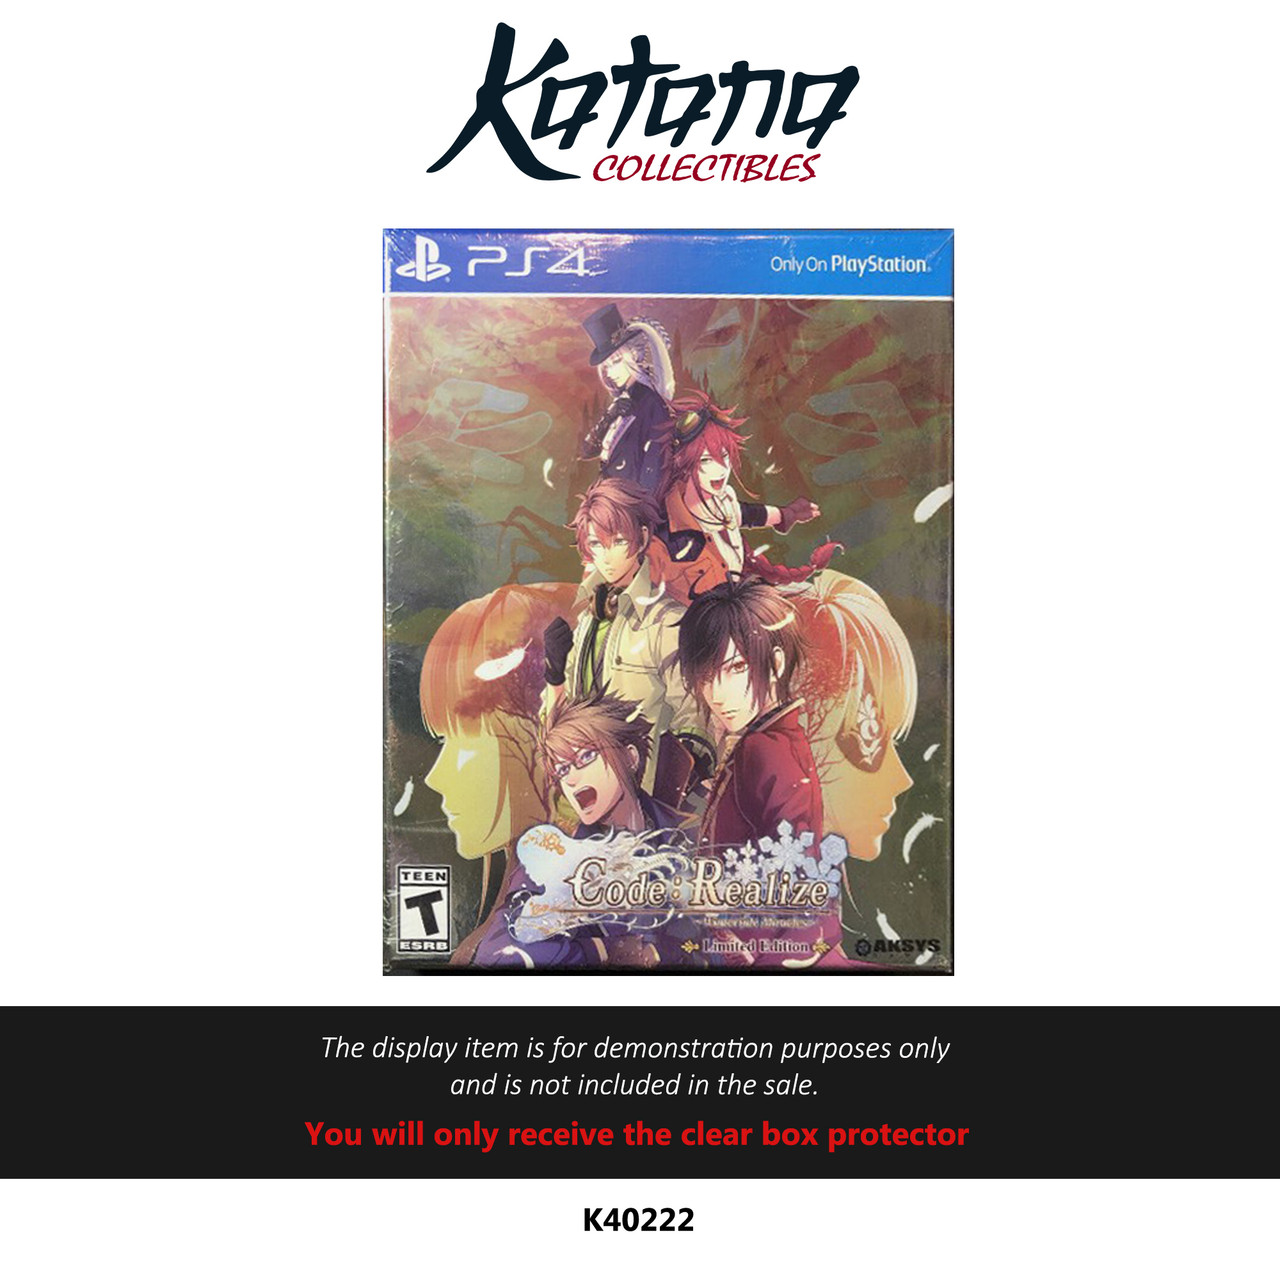 Katana Collectibles Protector For Code:Realize Wintertide Miracles Limited Edition PS4